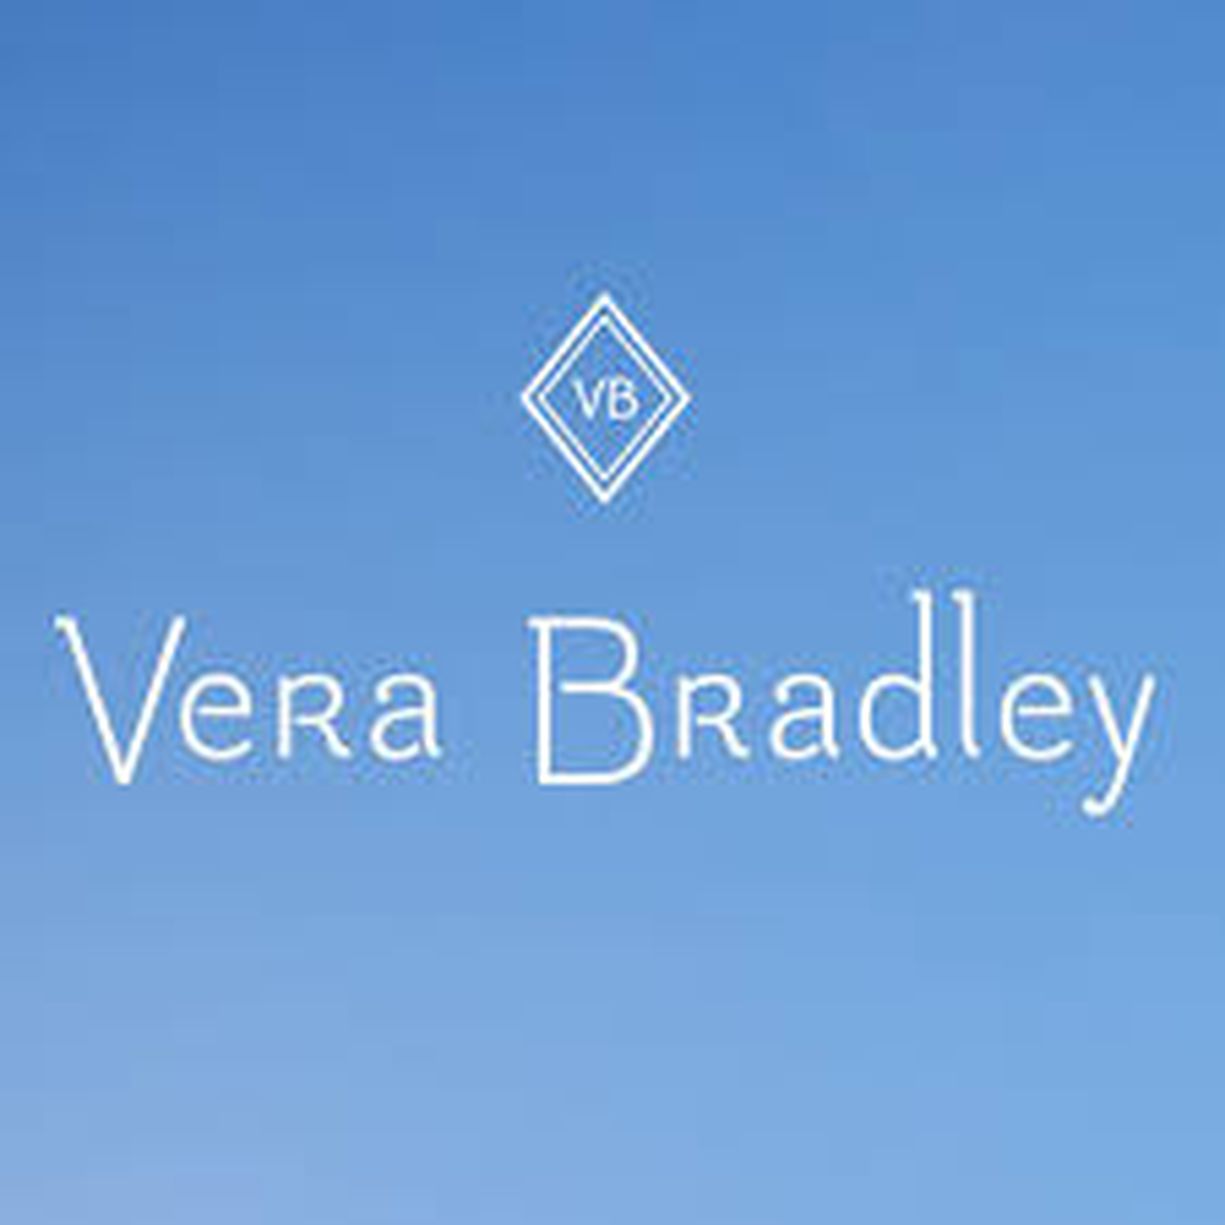 Vera Bradley Introduces Metaverse And Debut NFT Collection